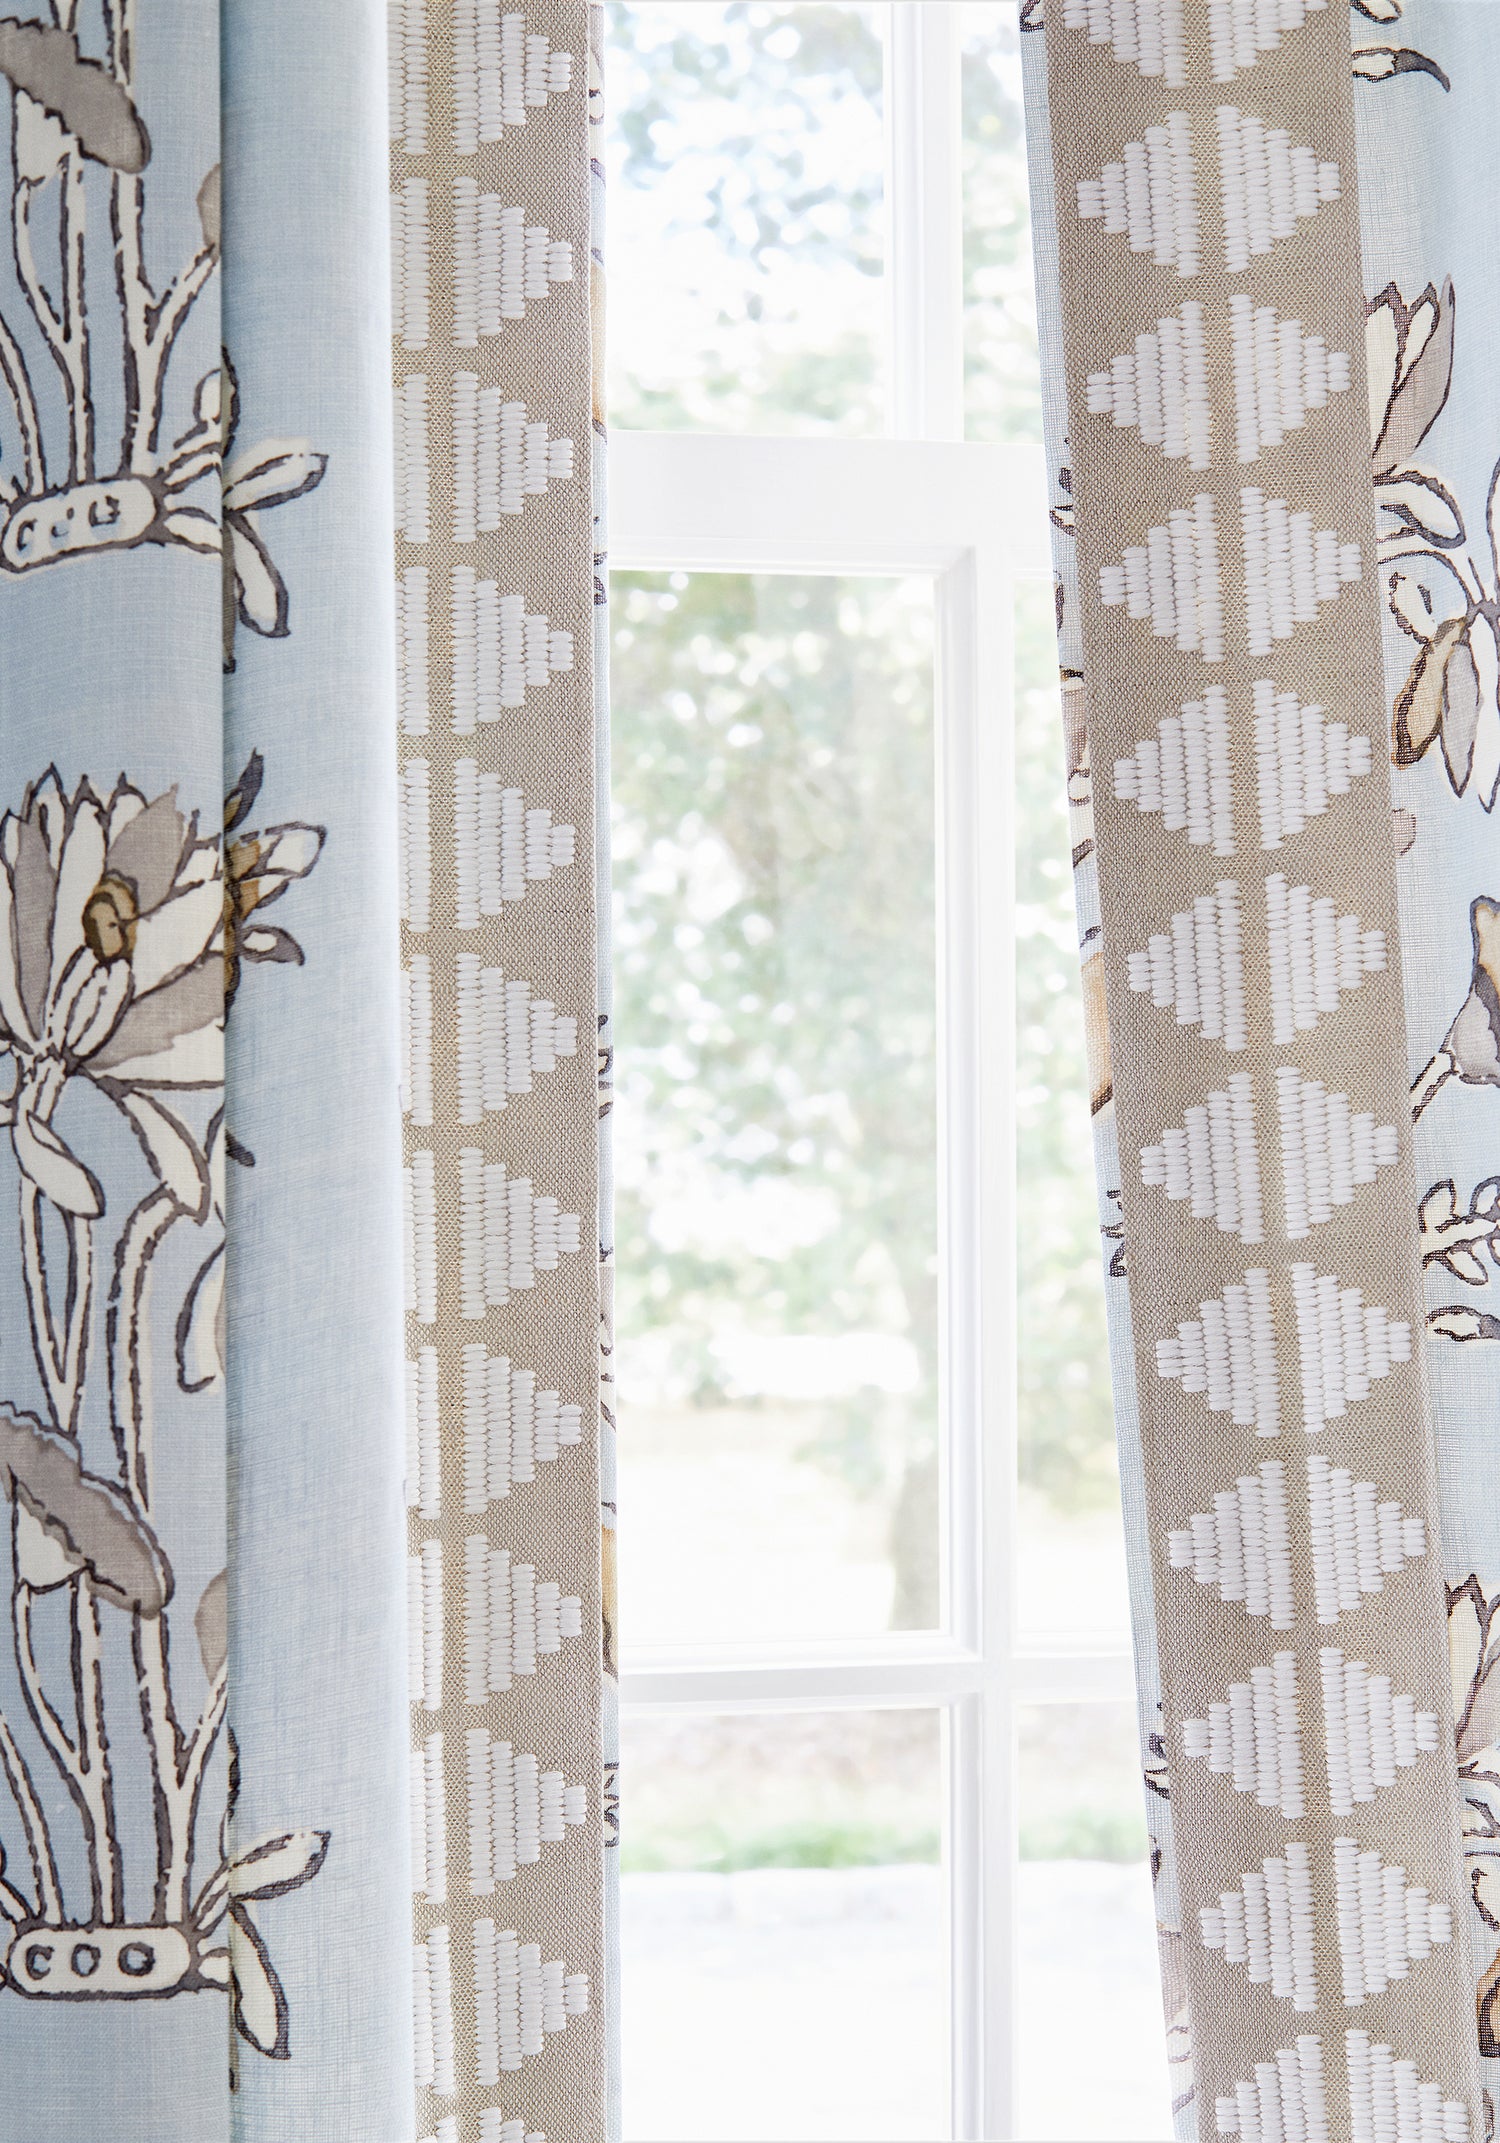 Detail of draperies in Lily Flower printed fabric in spa blue color with linen trim - pattern number F913201 - by Thibaut in the Mesa collection